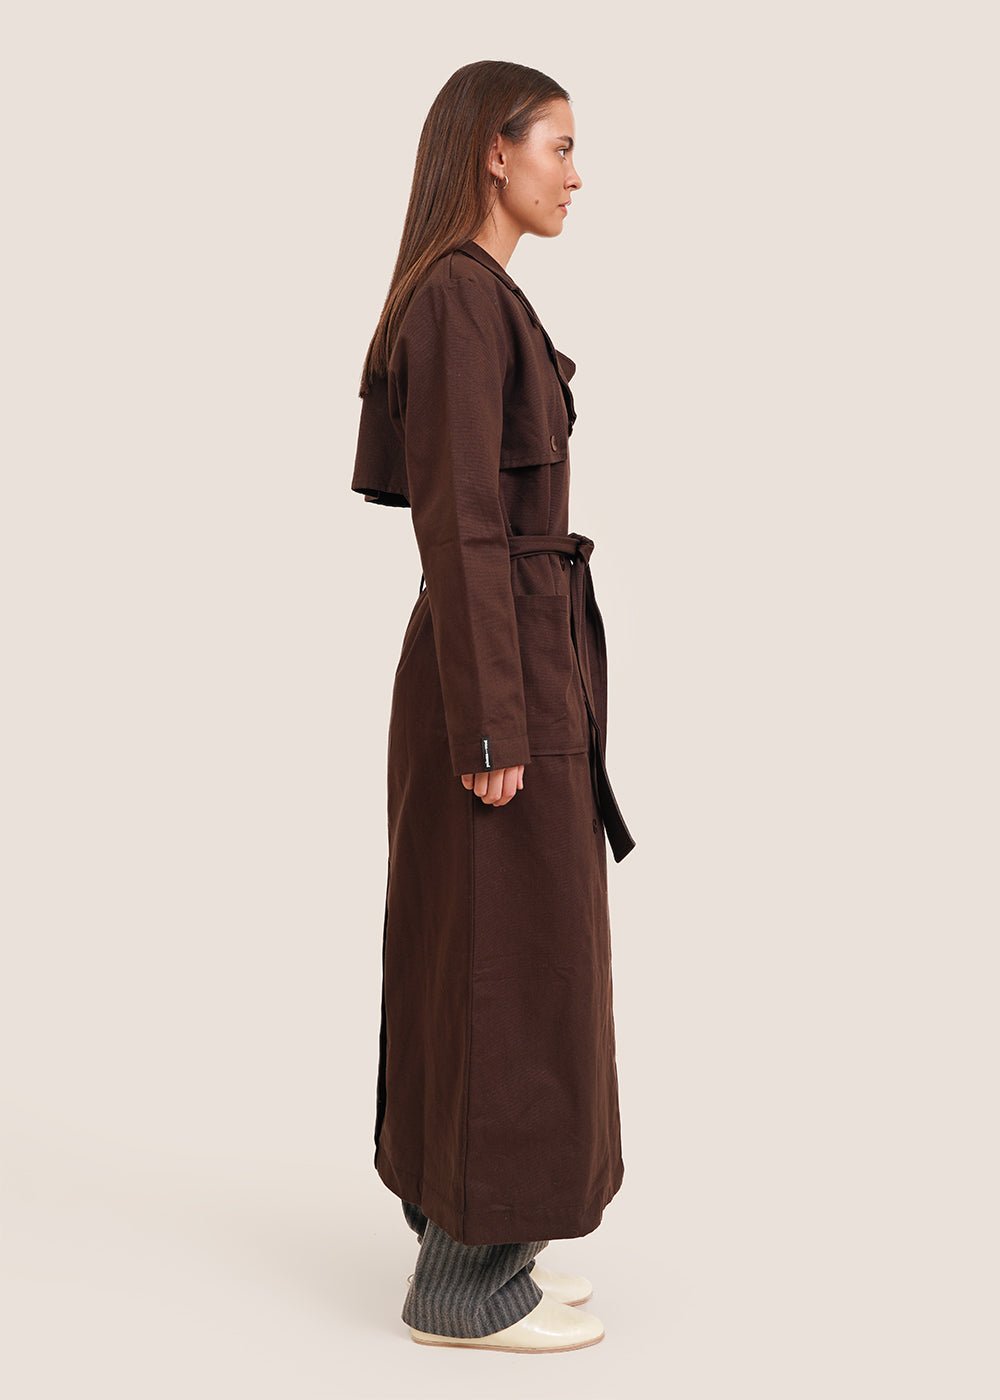 Paloma Wool Brown Pauvet Jacket - New Classics Studios Sustainable Ethical Fashion Canada